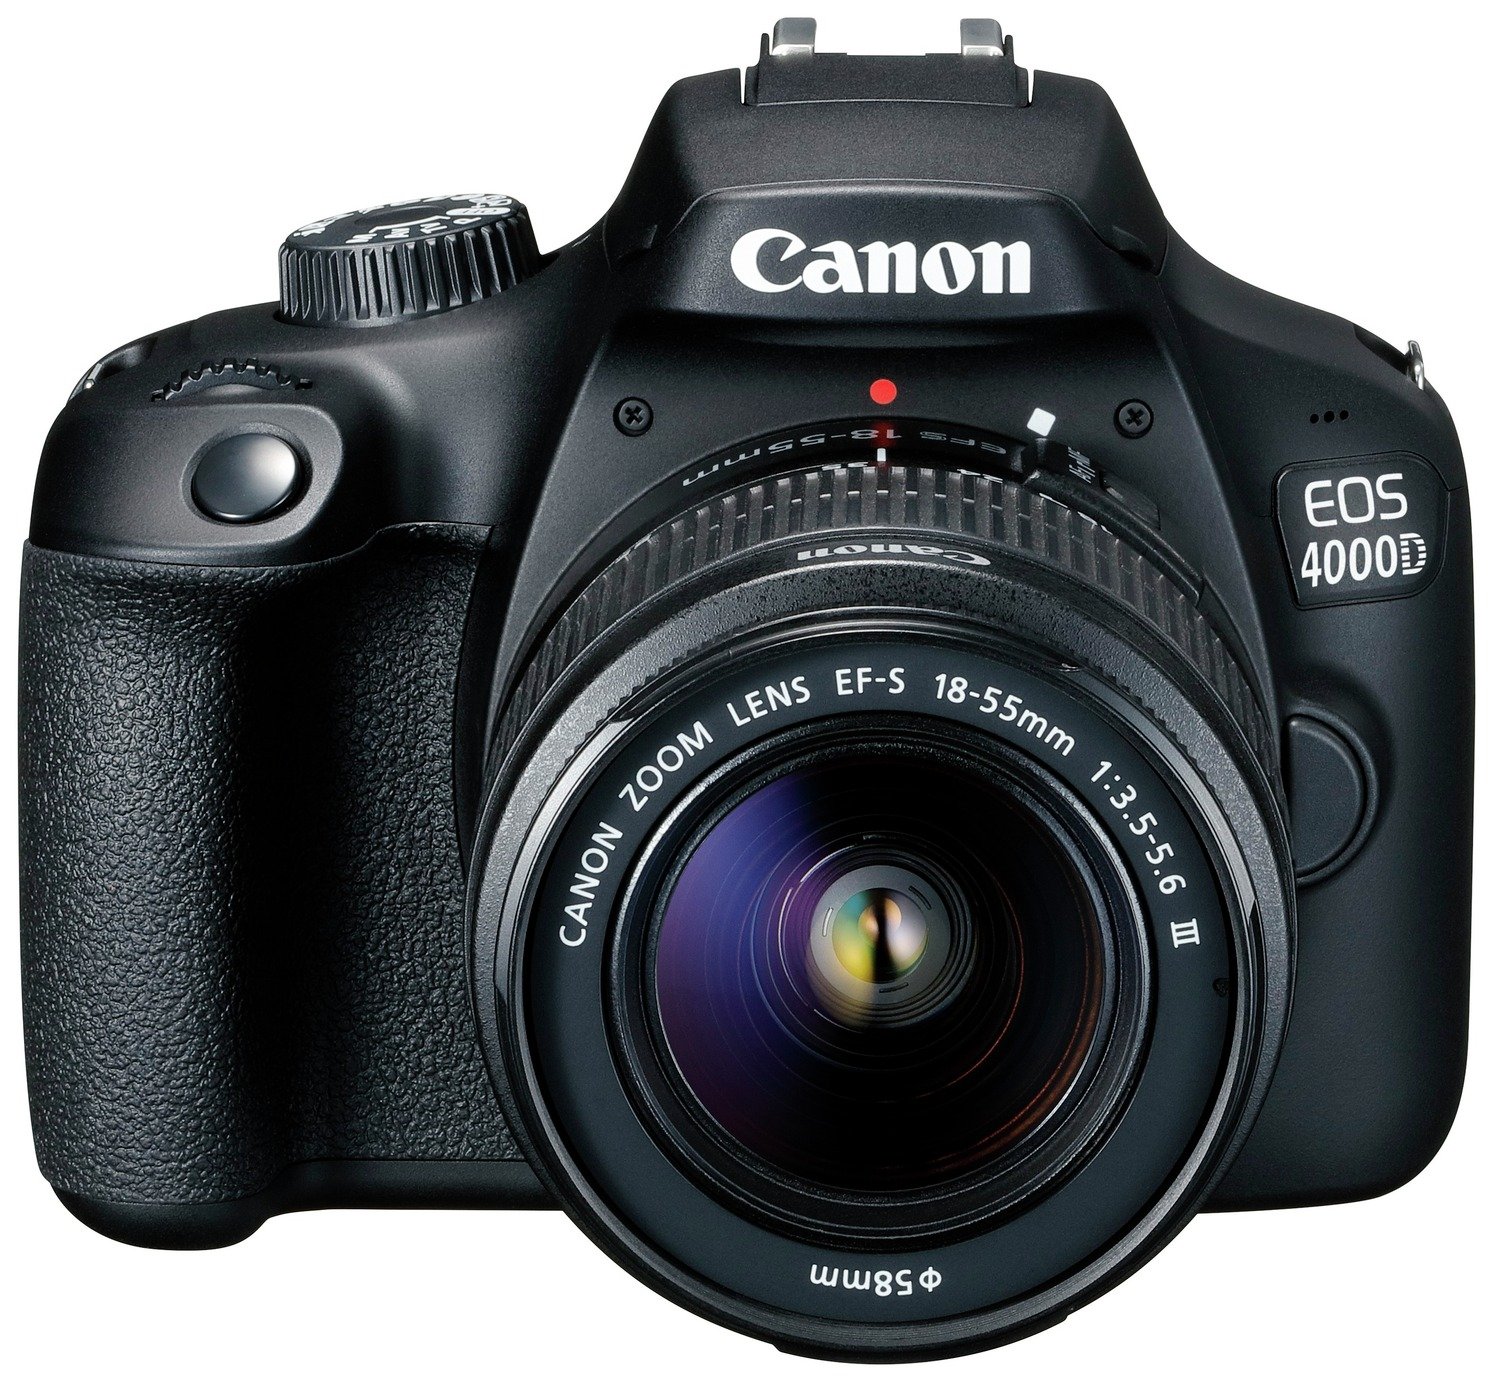 Canon EOS 4000D DSLR Camera Body with 18-55mm Lens Review